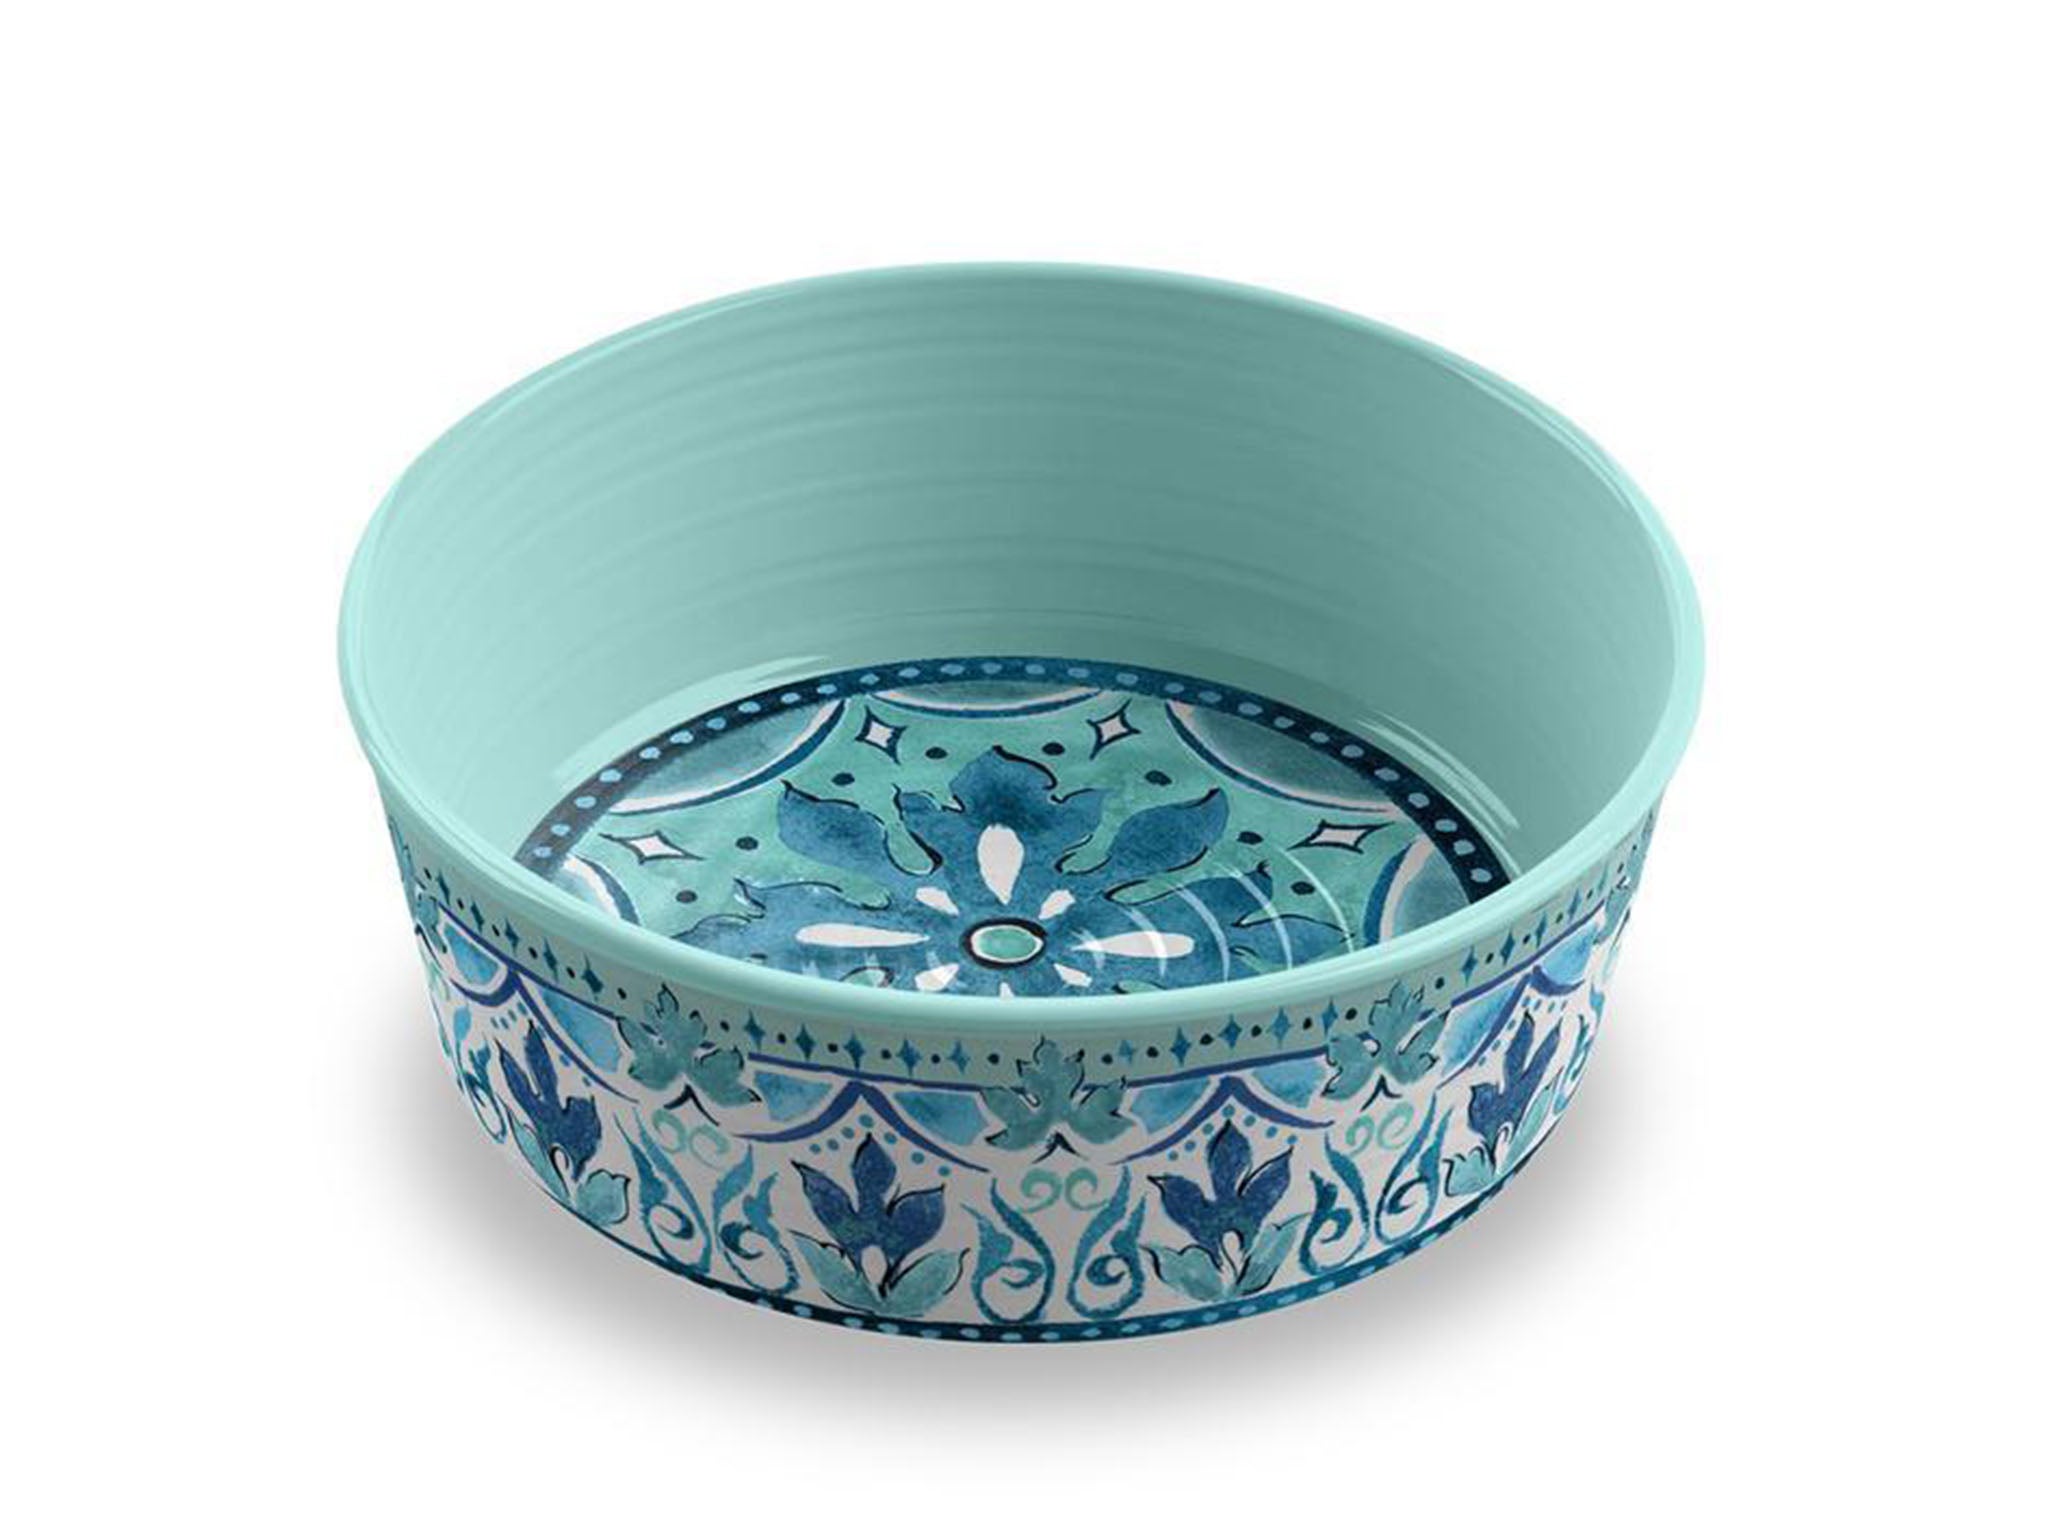 This colourful bowl will make dinnertime feel like a luxury